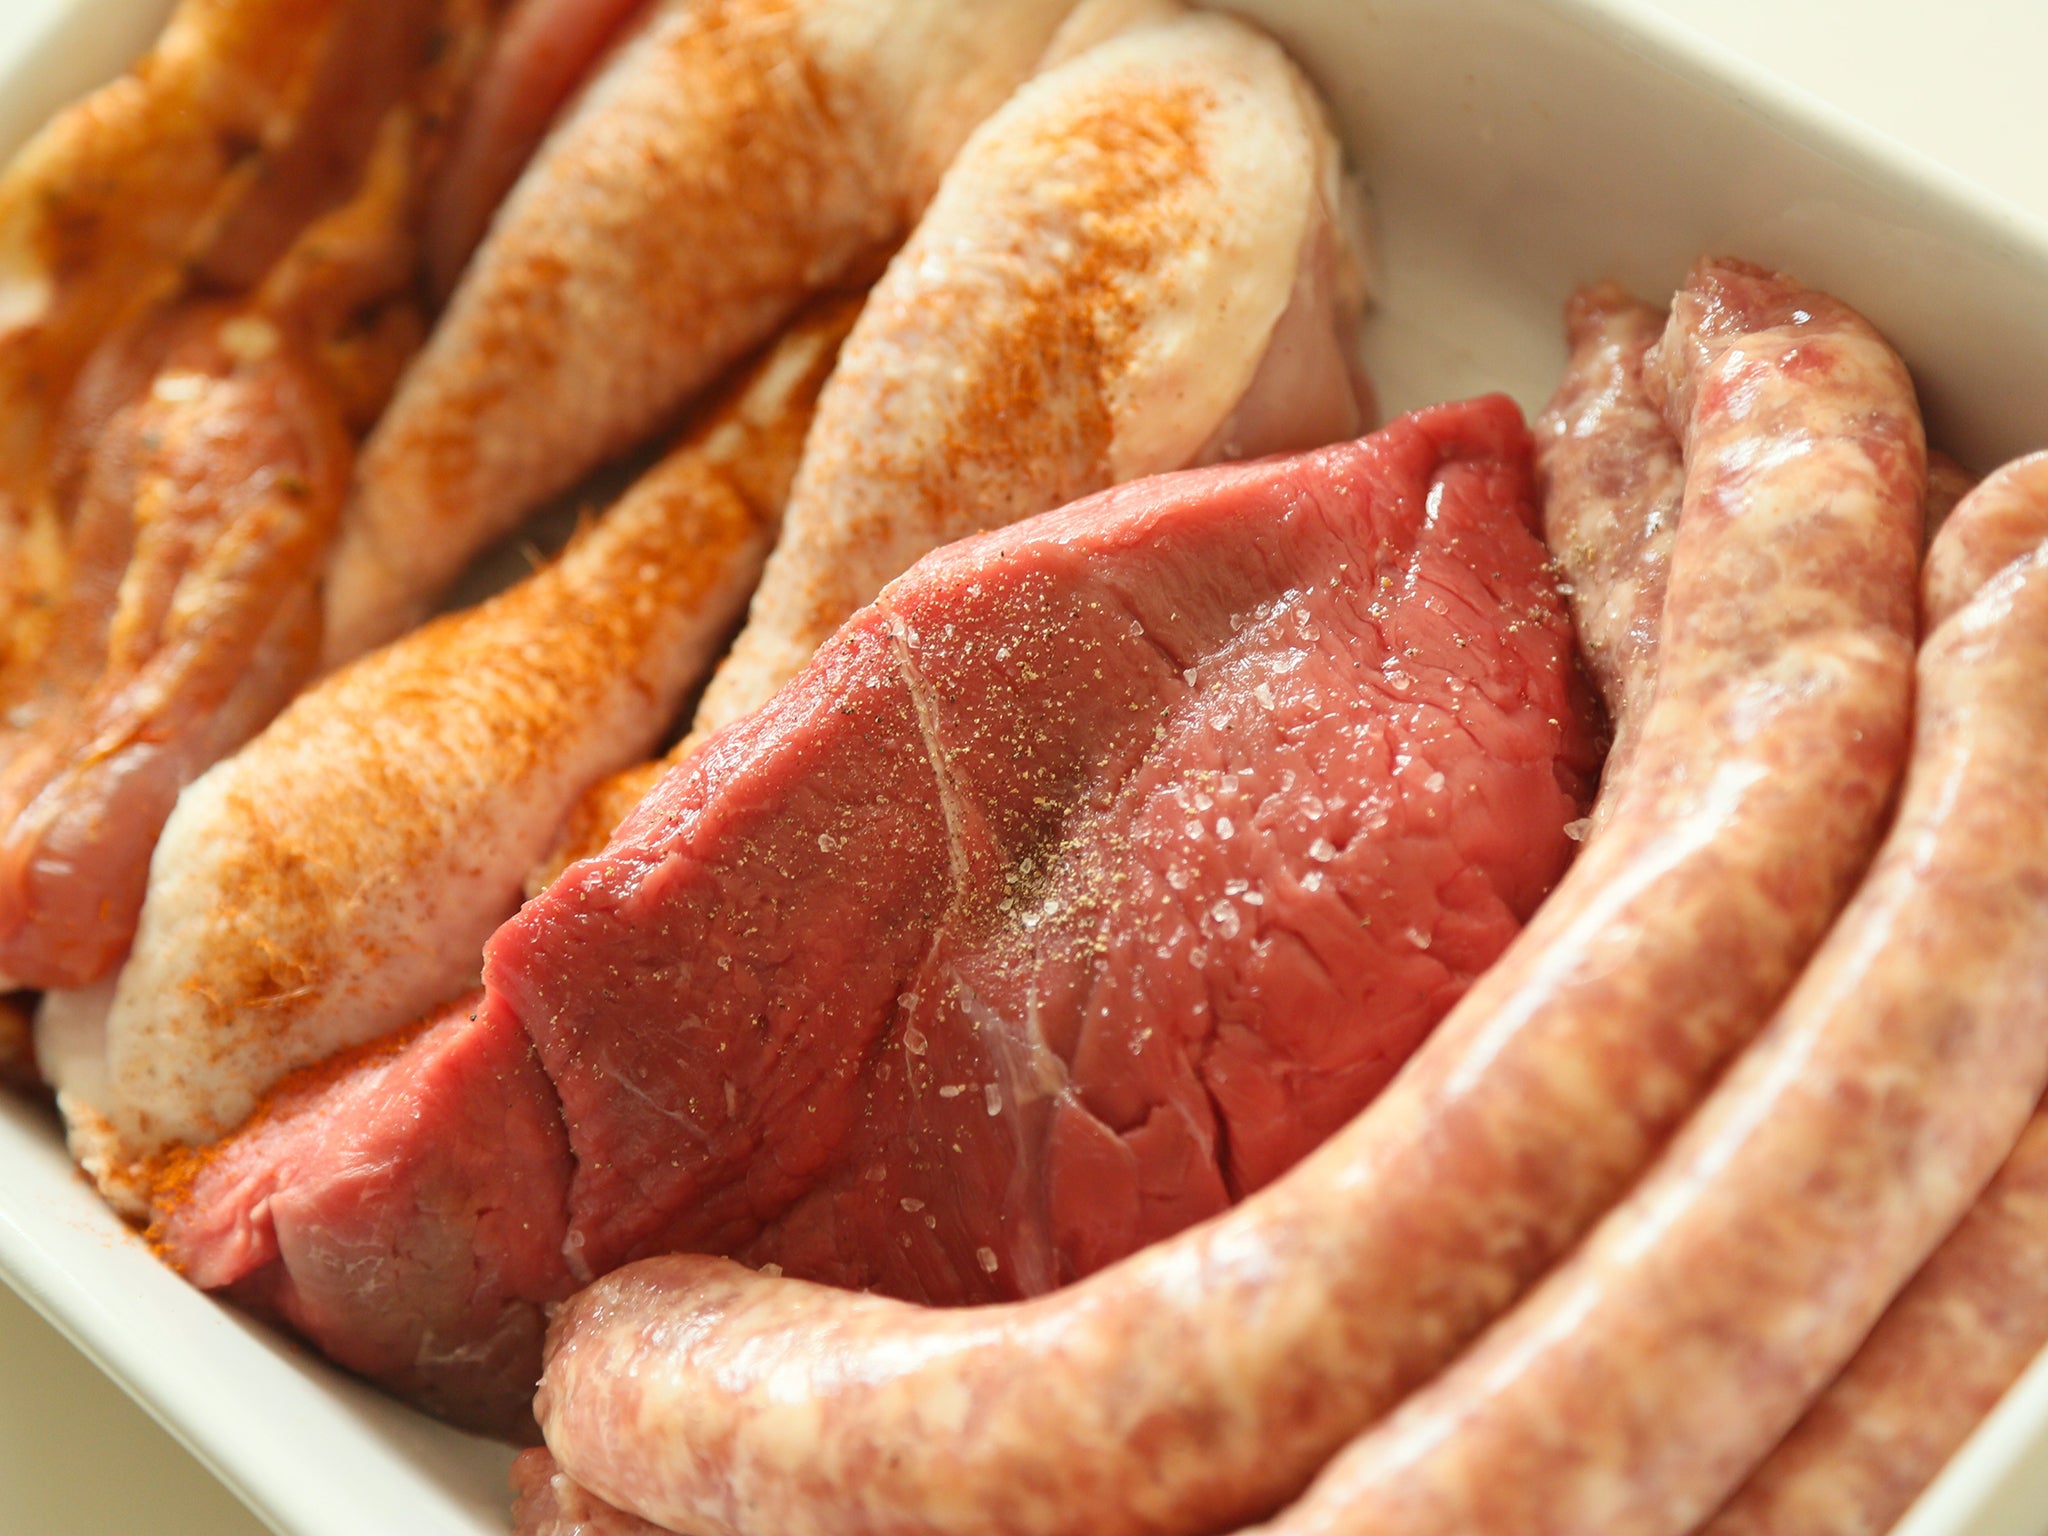 The World Cancer Research Fund has already come out to say that there is strong evidence that eating a lot red and processed meat increases the risk of bowel cancer